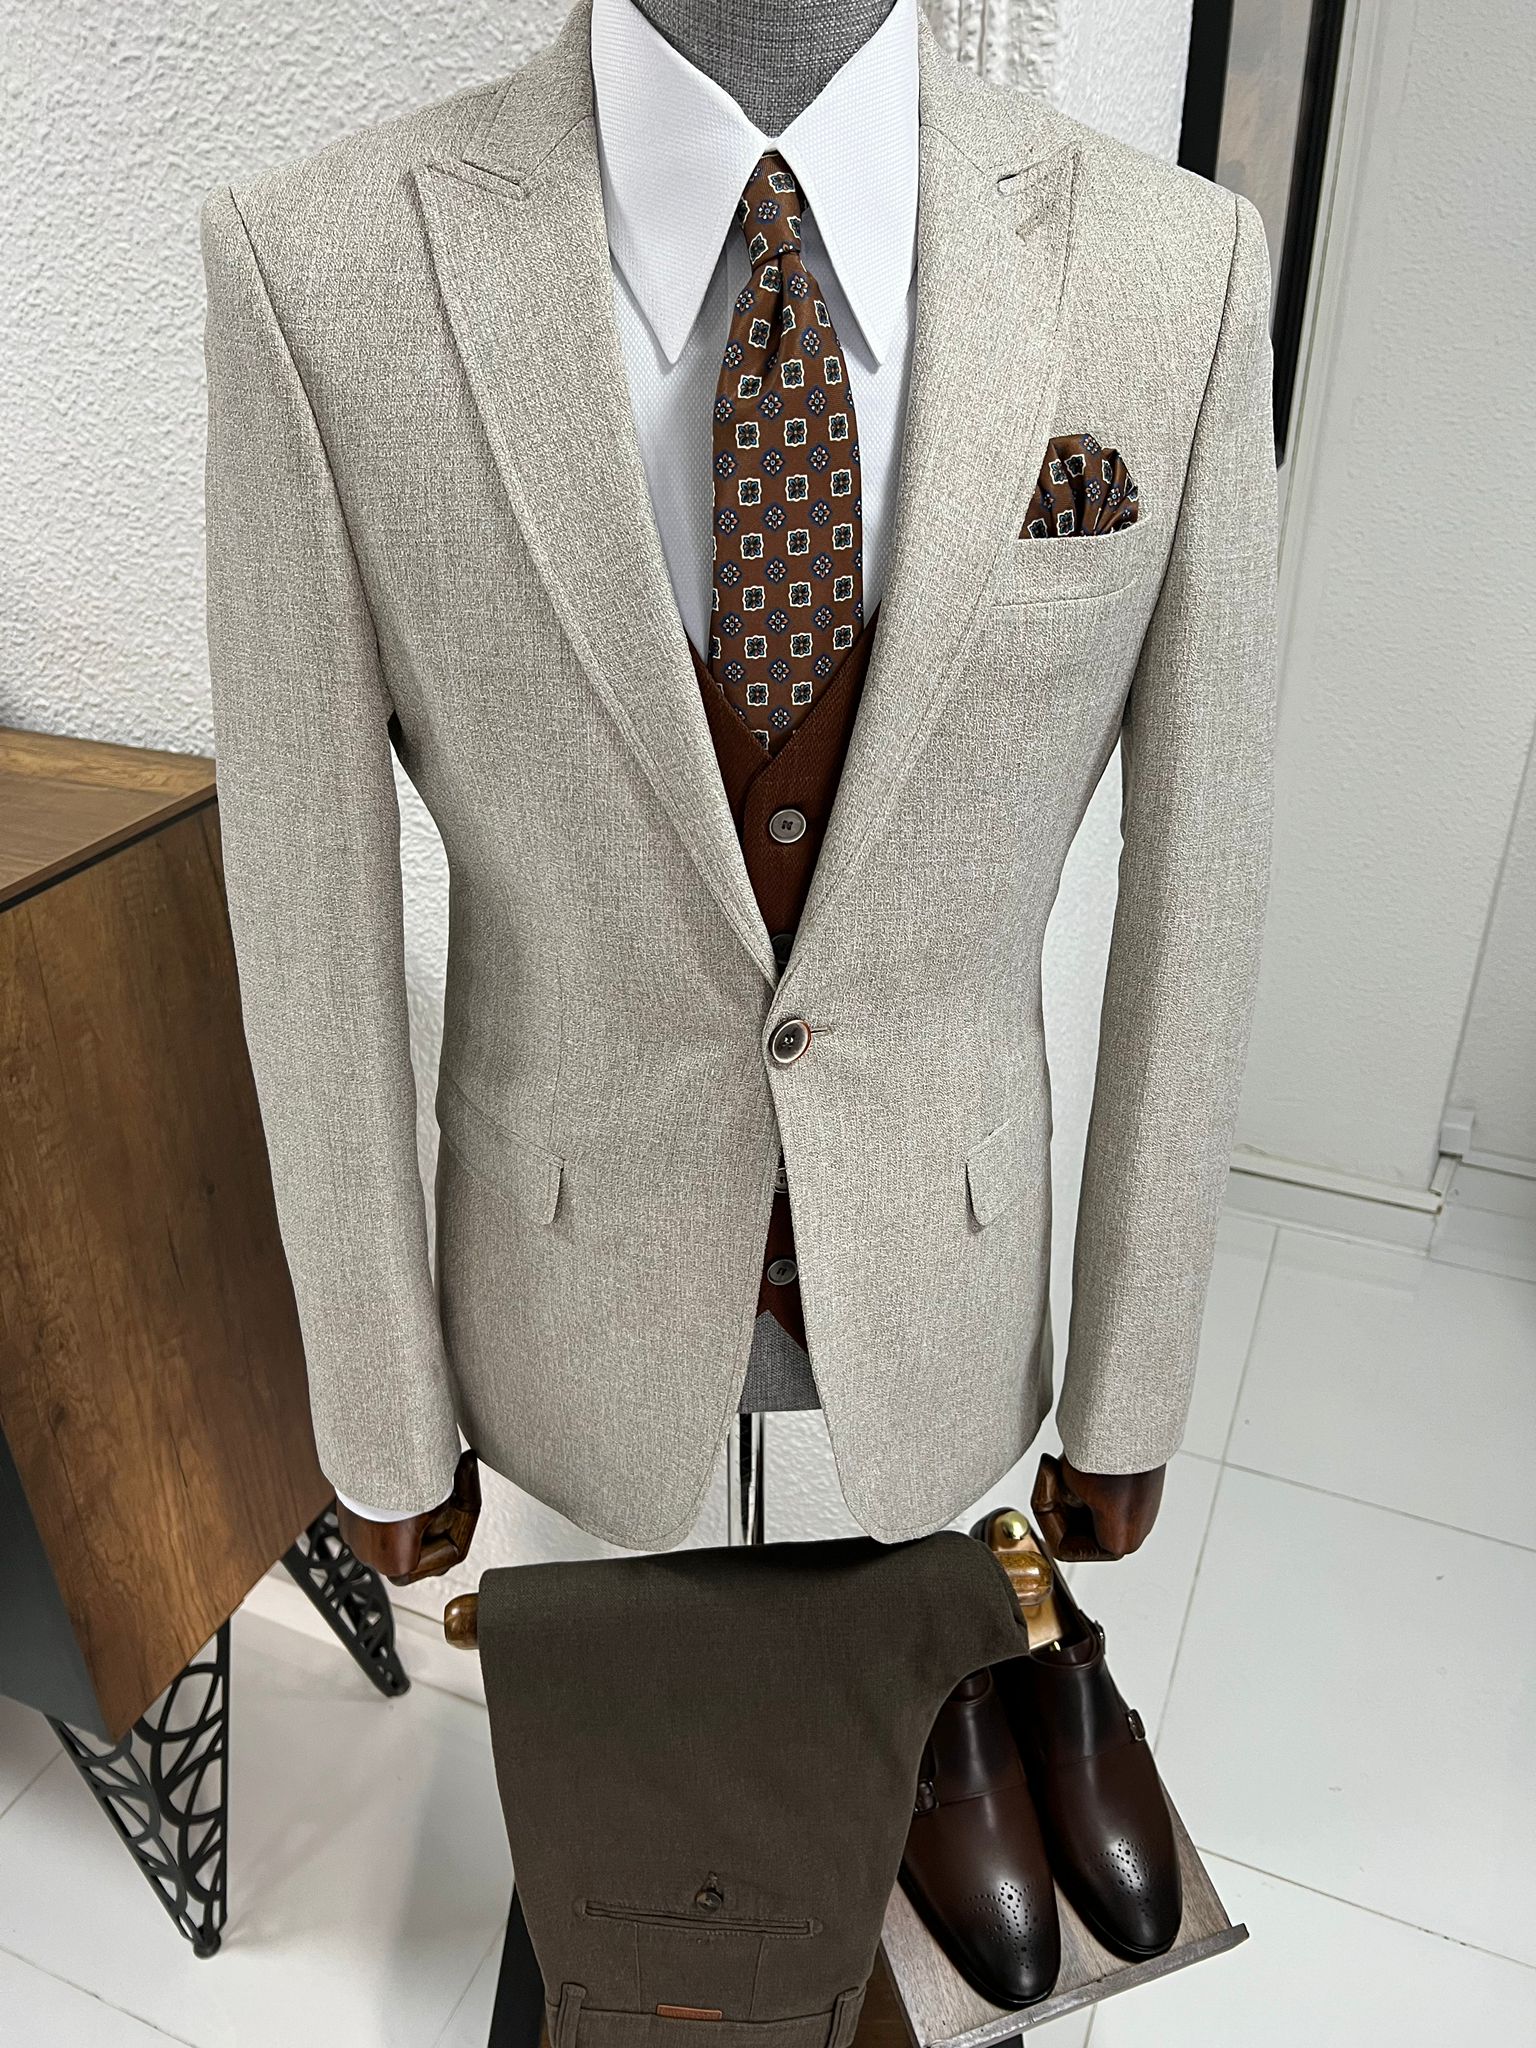 Men's Style and Fashion Tips - Next Luxury | Mens fashion suits, Mens  outfits, Blazer outfits men